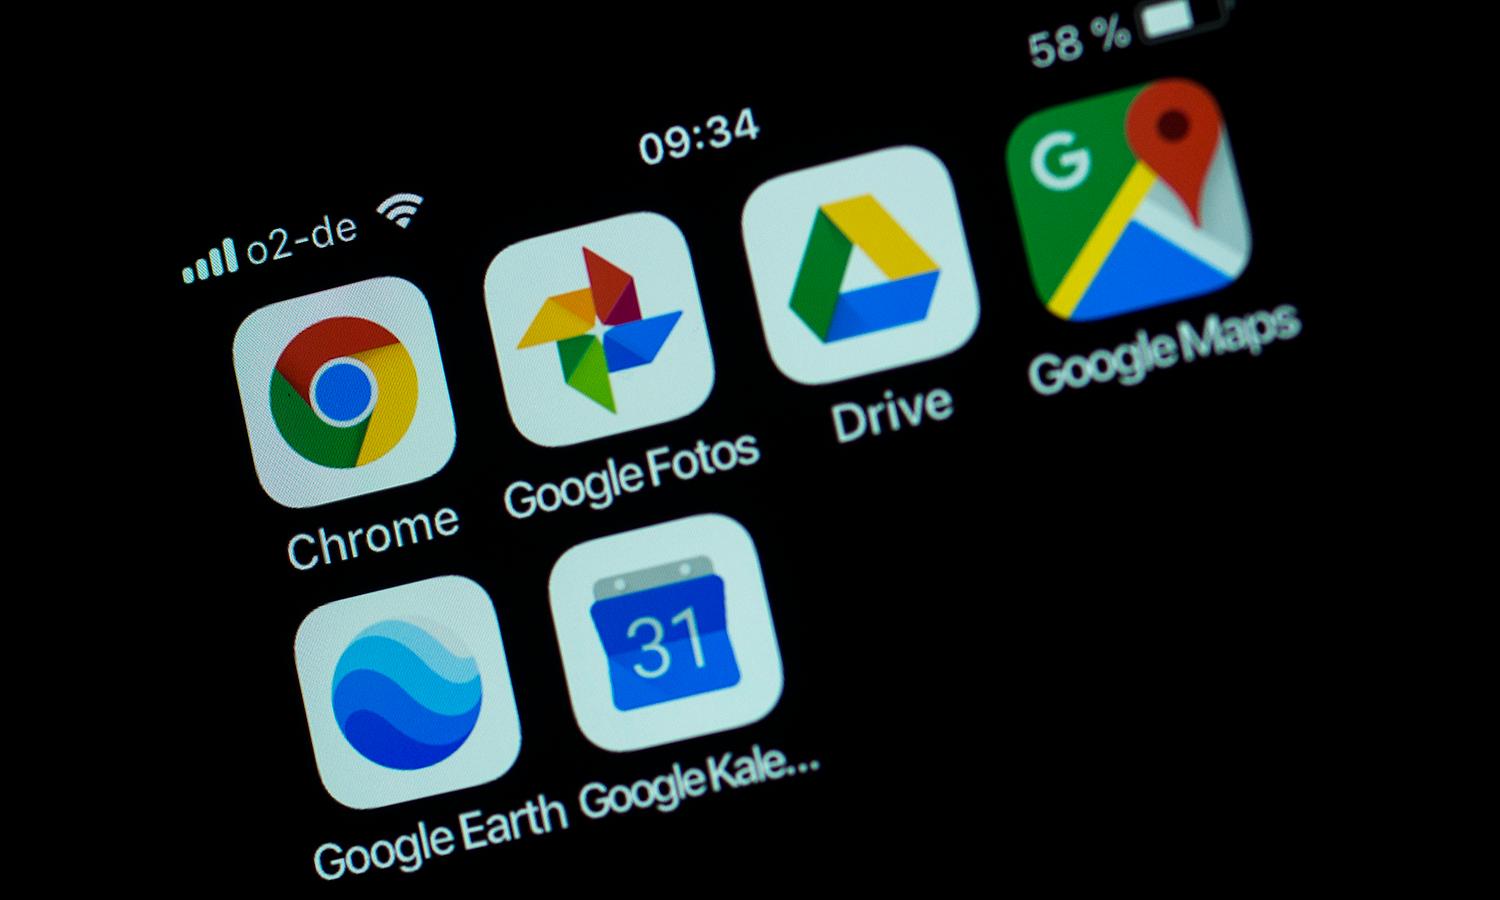 Google apps on a smartphone